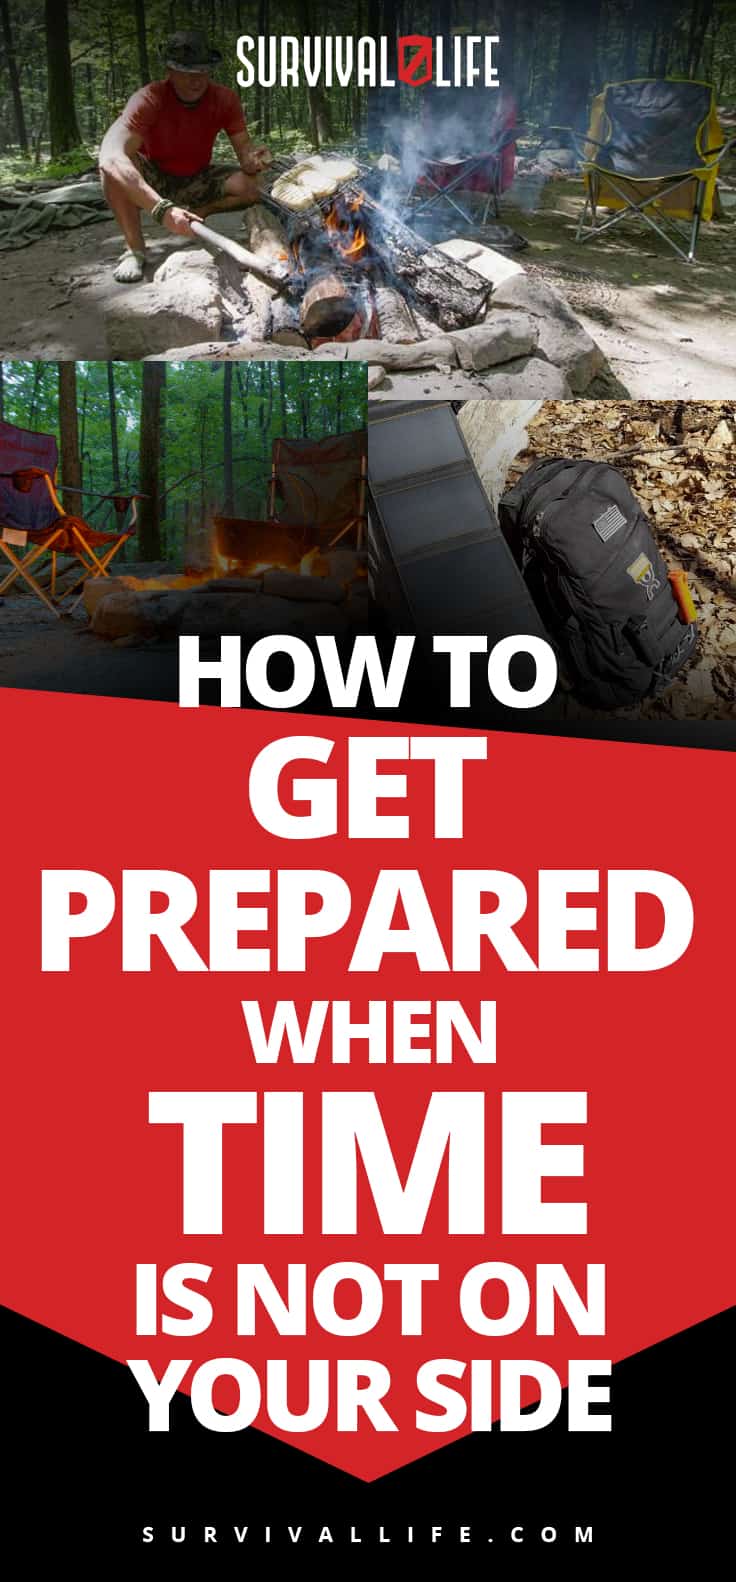 How to Get Prepared When Time Is NOT On Your Side